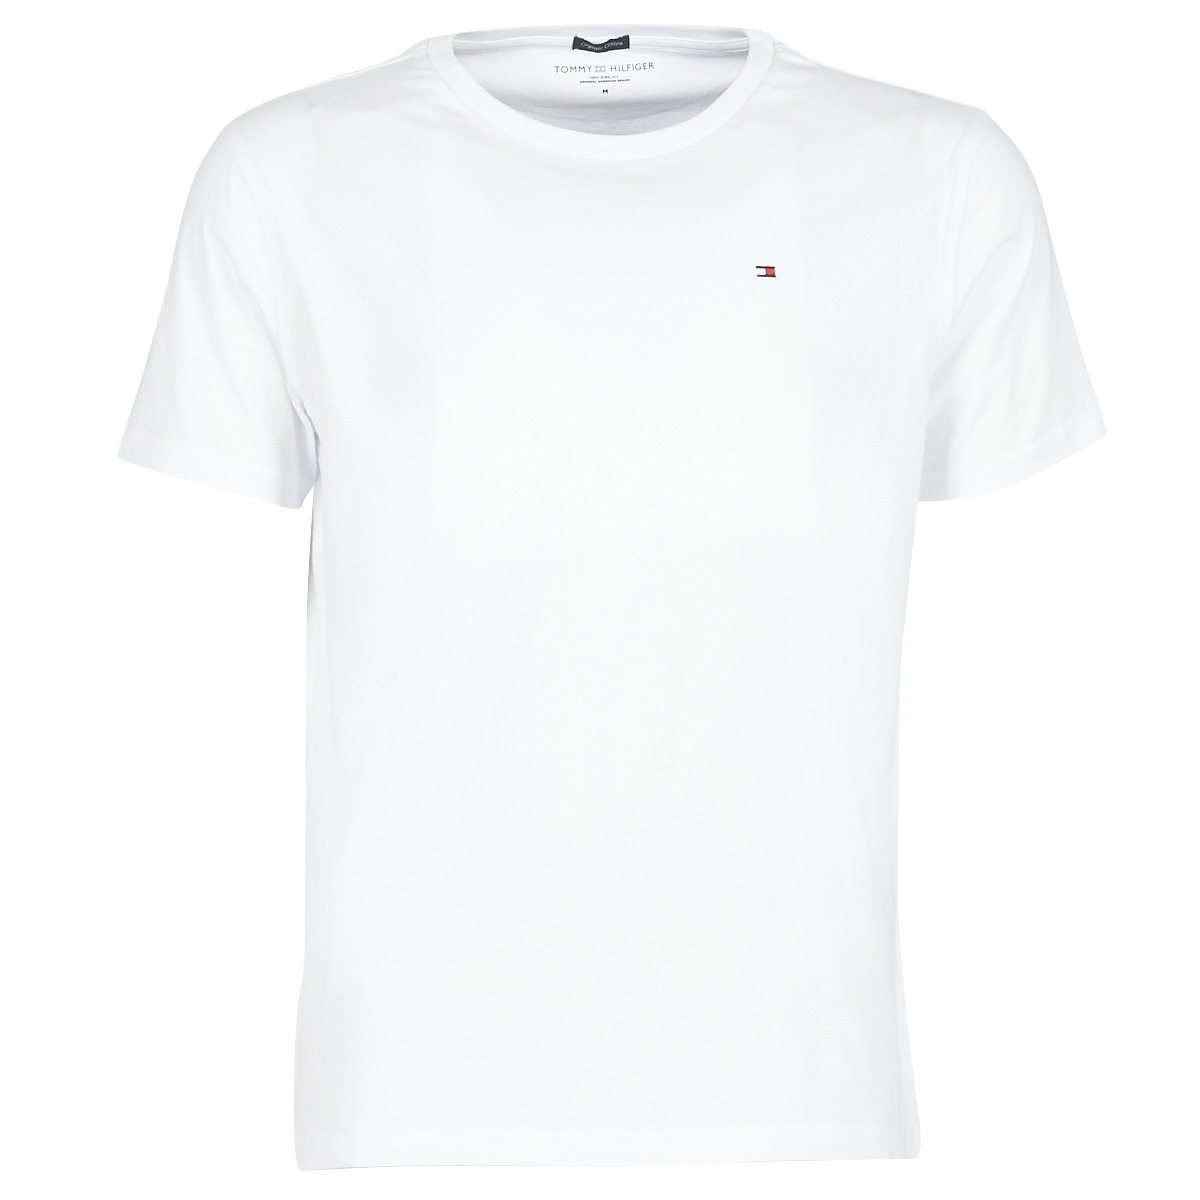 NET ! delivery COTTON Clothing t-shirts - Spartoo - Tommy Hilfiger Men | ICON SLEEPWEAR-2S87904671 short-sleeved Free White